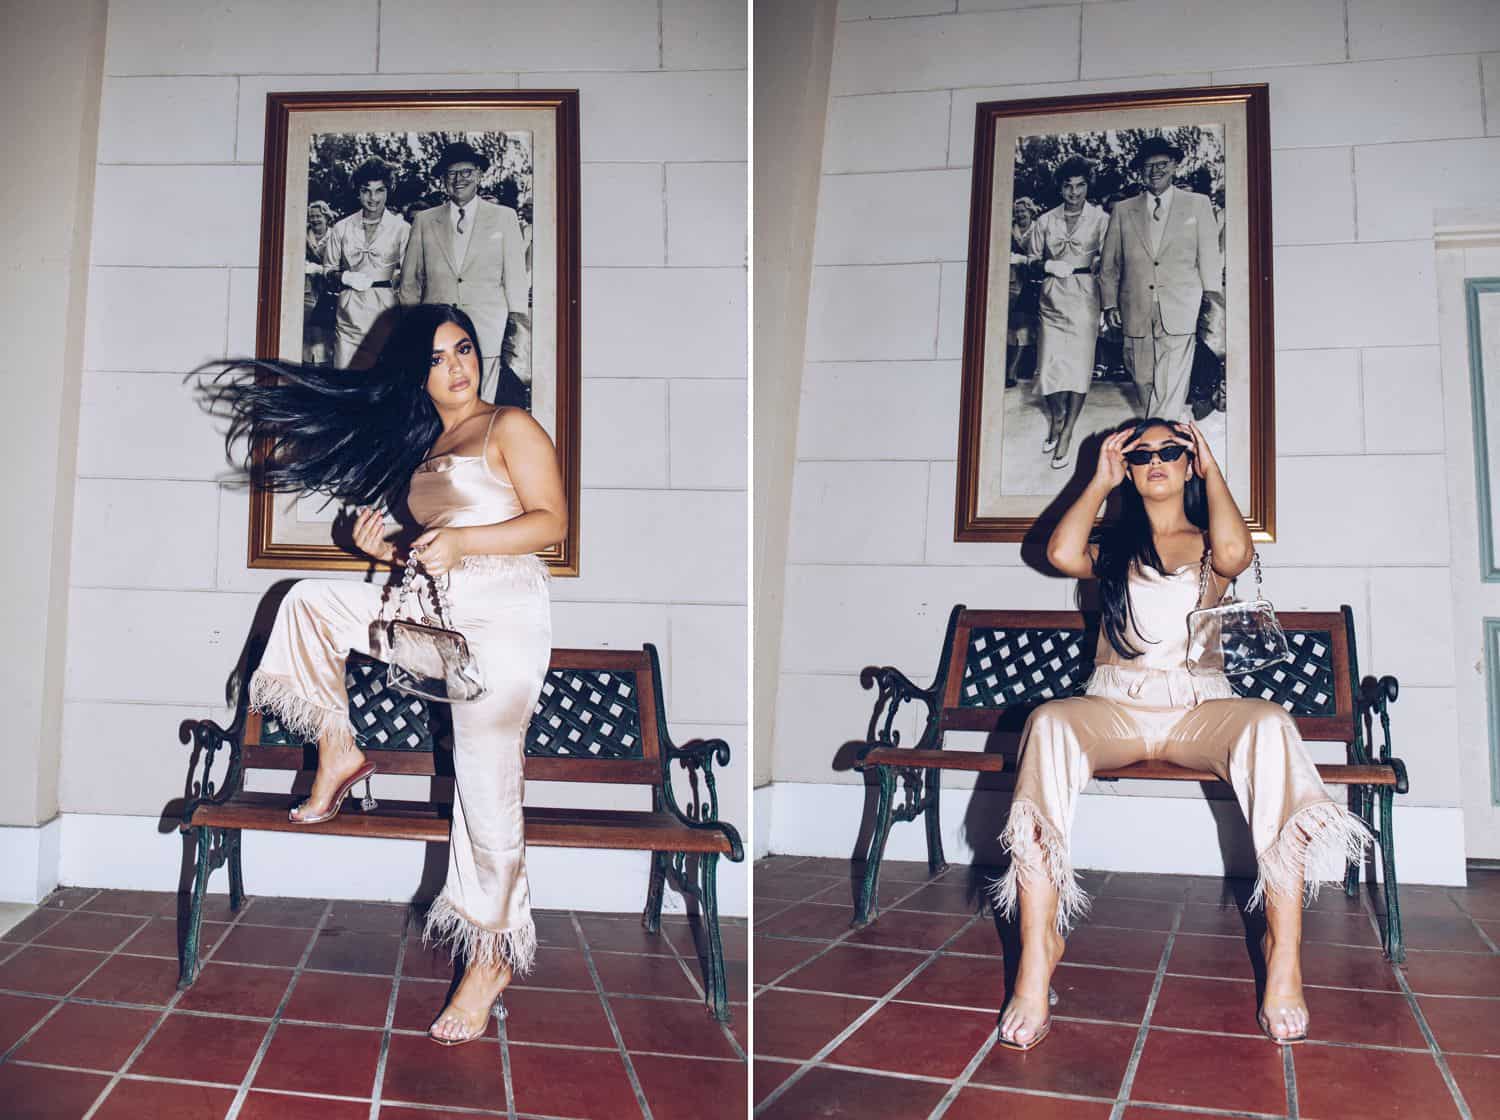 A black-haired model wearing all white poses on a wrought iron bench in front of an enormous framed photograph while tossing her hair